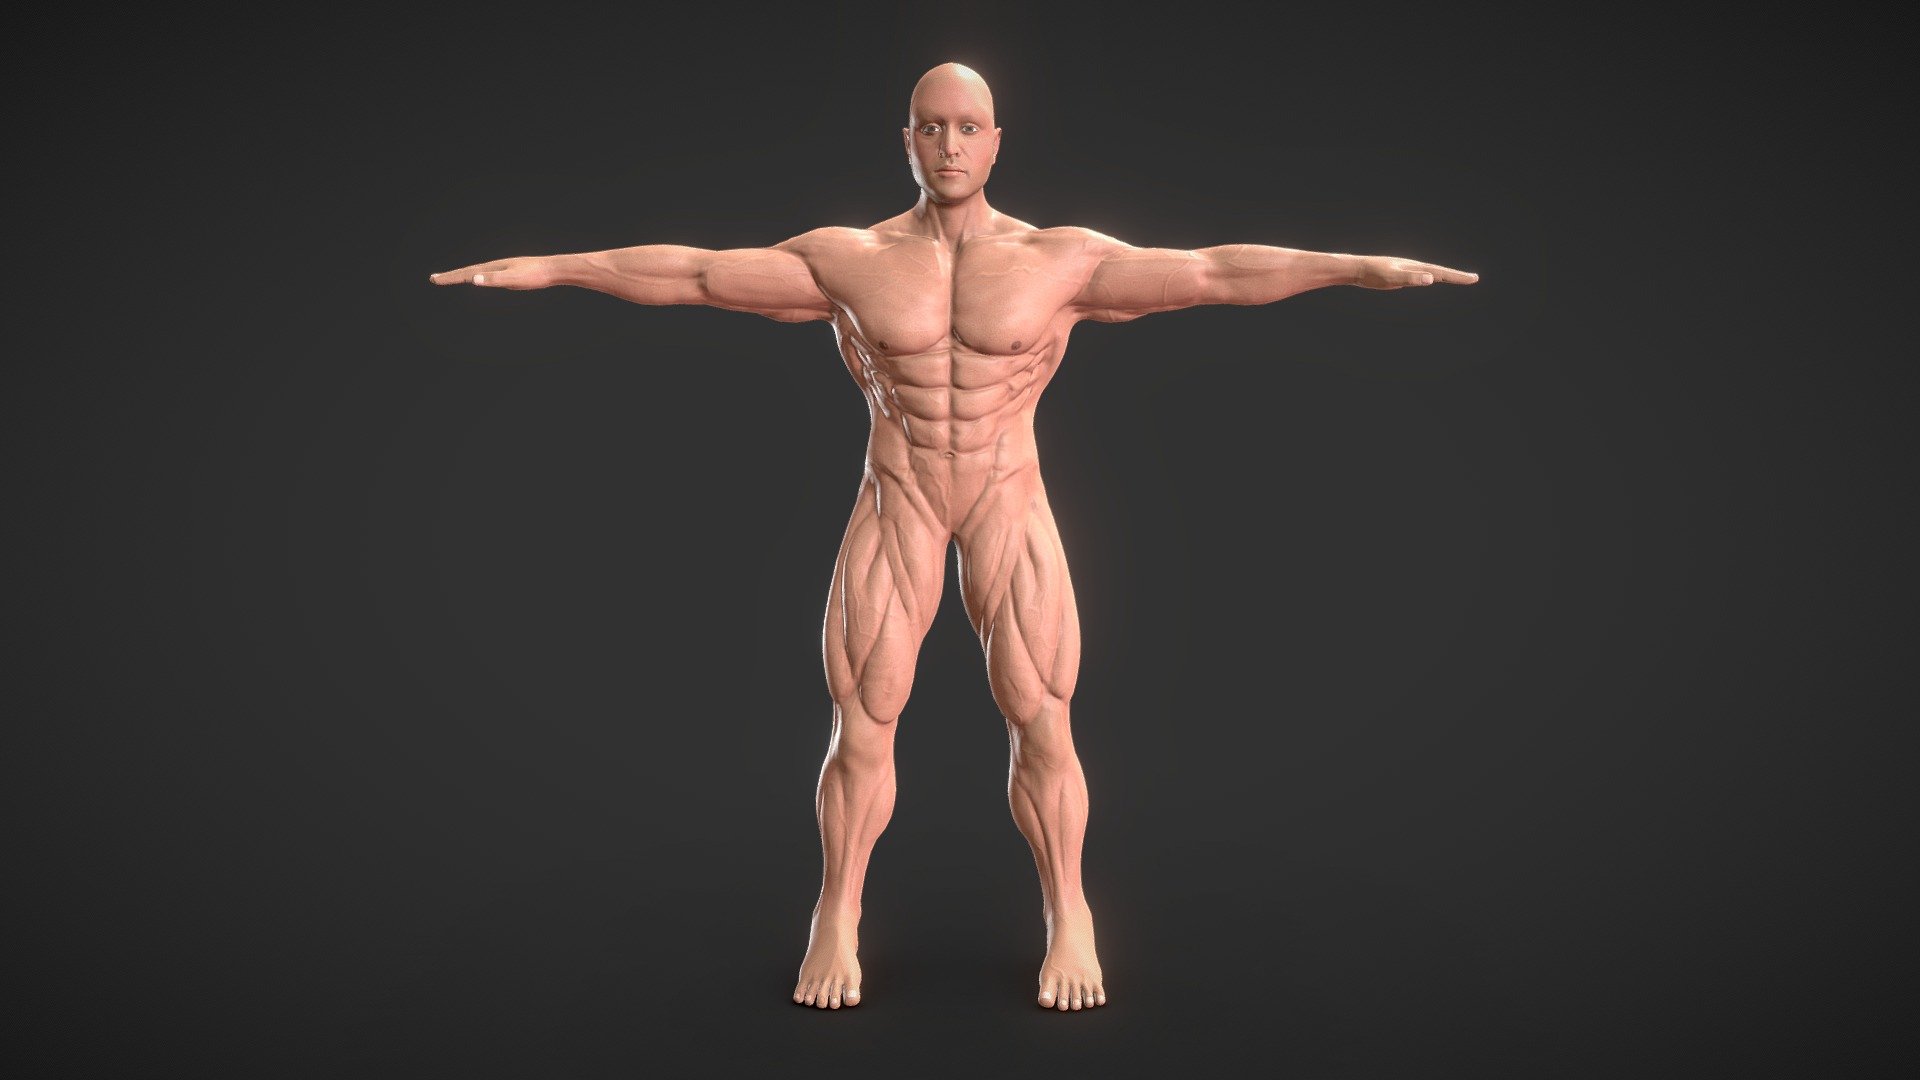 Muscular Male body 3d model creared for study human anatomy. Model ready for bodybuilding poses and rig and animations. you can  easily modify further. Model can be used for AR/VR apps, games and movies. you can use model without textures as a Base mesh. You can create hairs based on your requirements. Hope you like it.
Press like for more free models 3d model